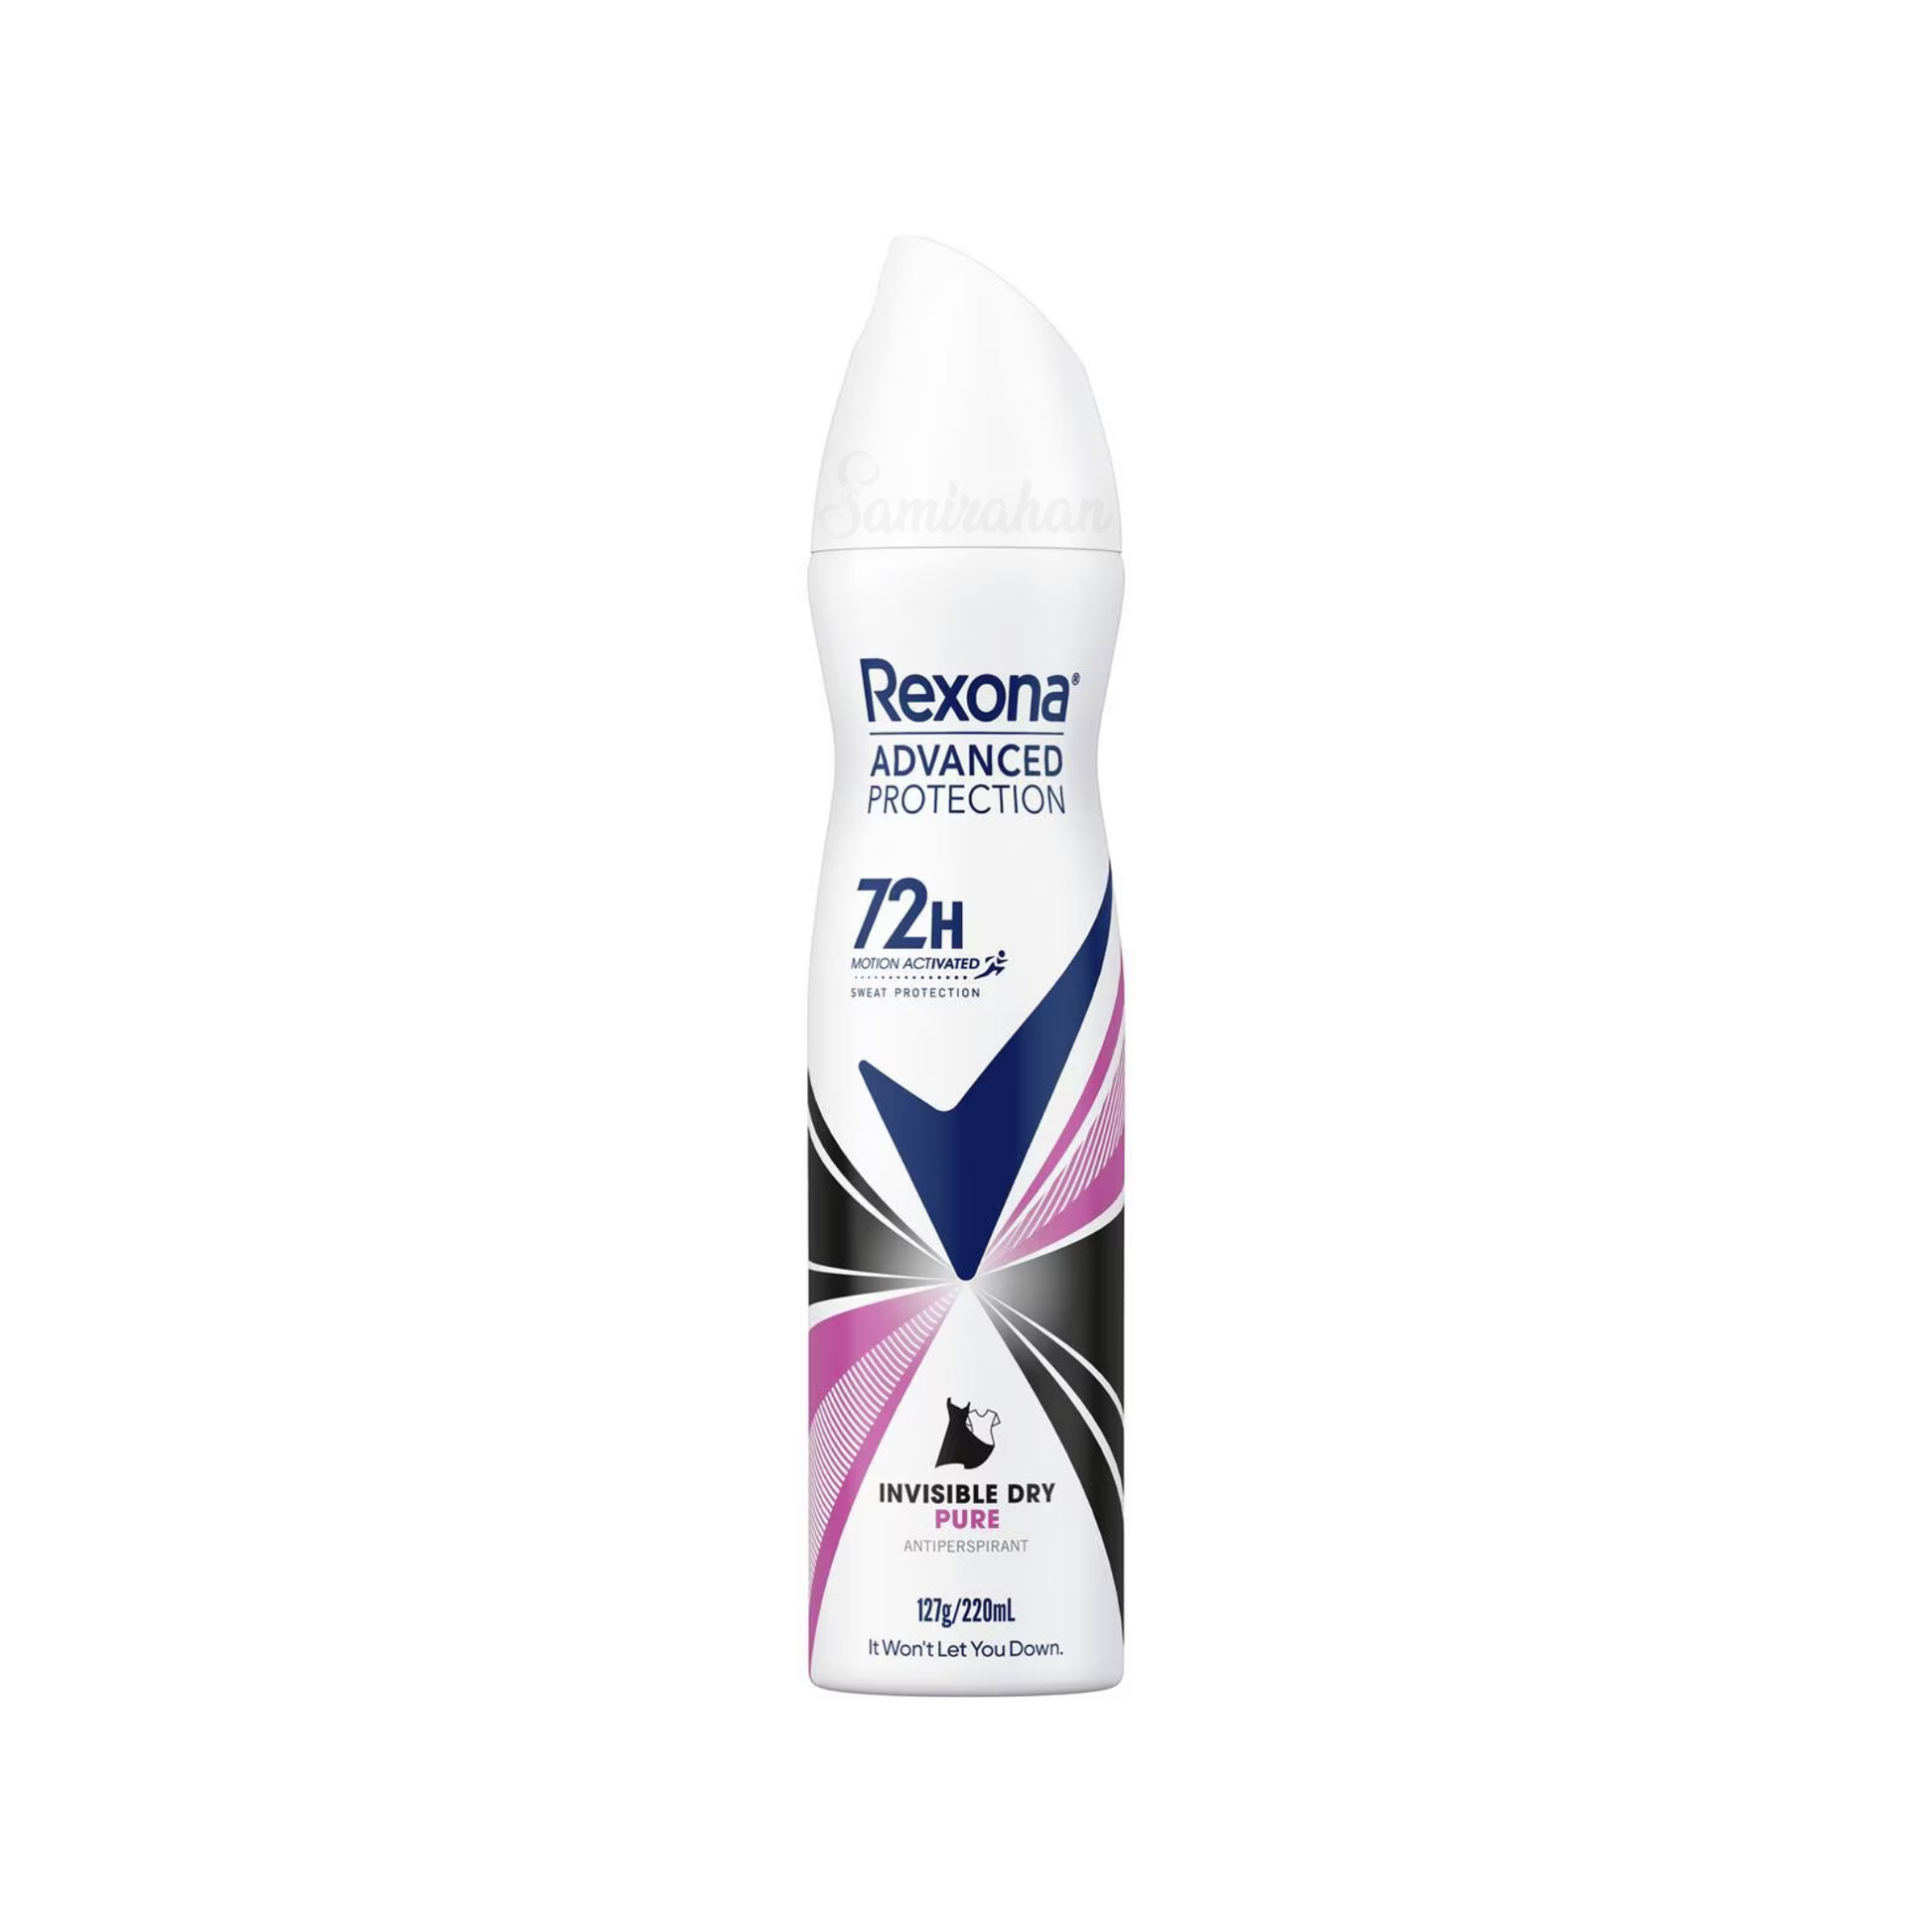 Rexona Advanced Protection Deodorant Women Invisible Dry aerosol provides 72 hours of nonstop sweat & odour protection – giving you the confidence to start moving & take on the day. Best imported foreign Australian authentic original genuine real premium quality luxury brand cheap fragrance price in Dhaka Bangladesh.